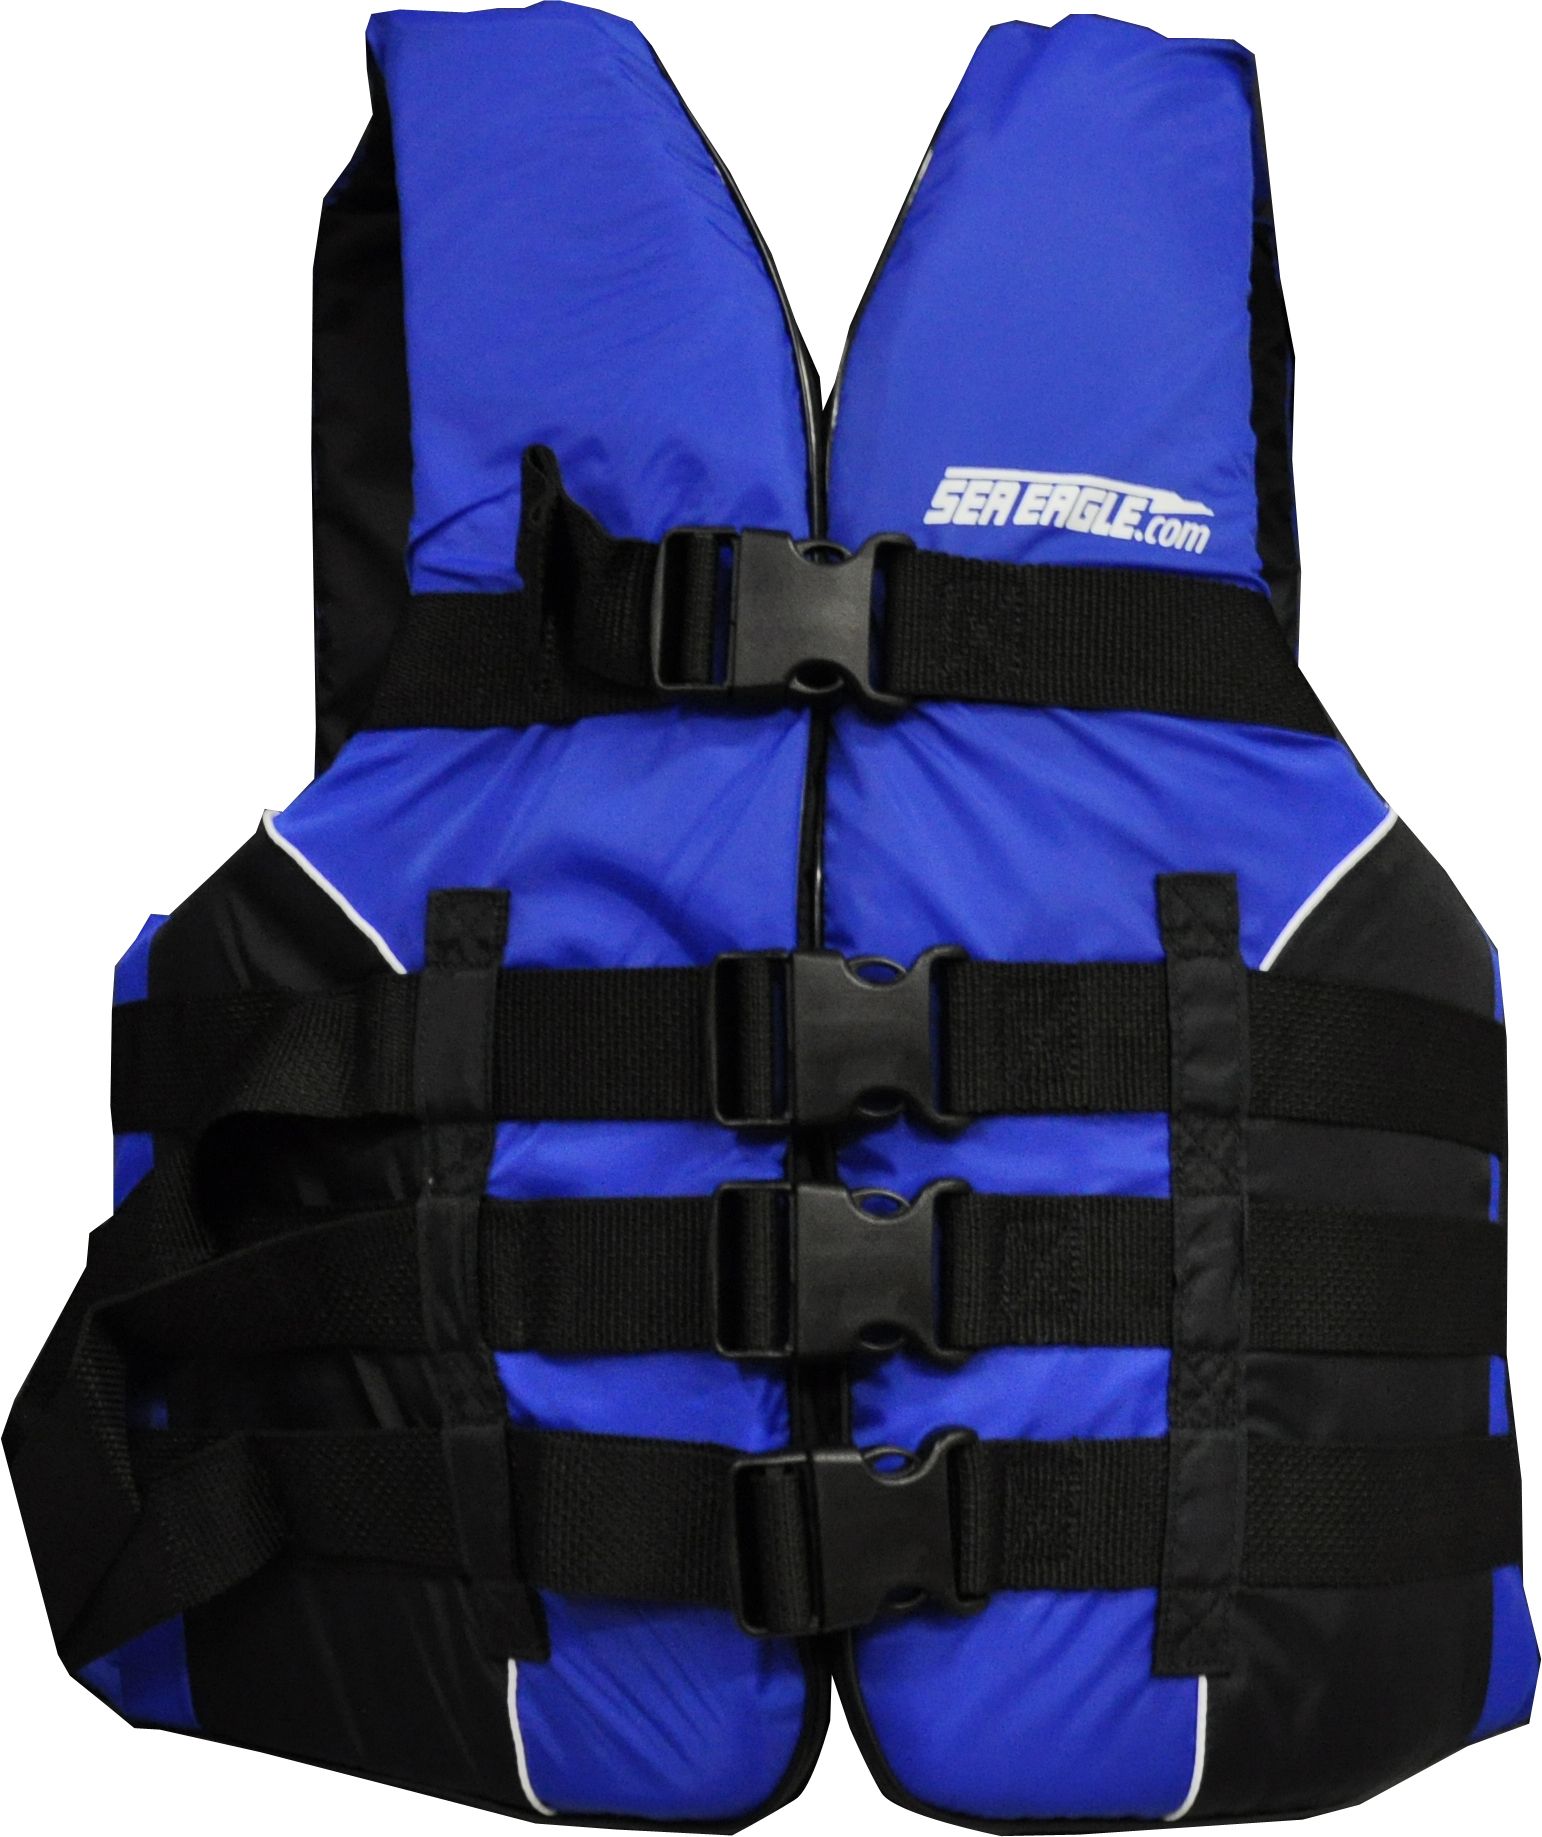 Boating Life Vests & Jackets | DICK'S Sporting Goods